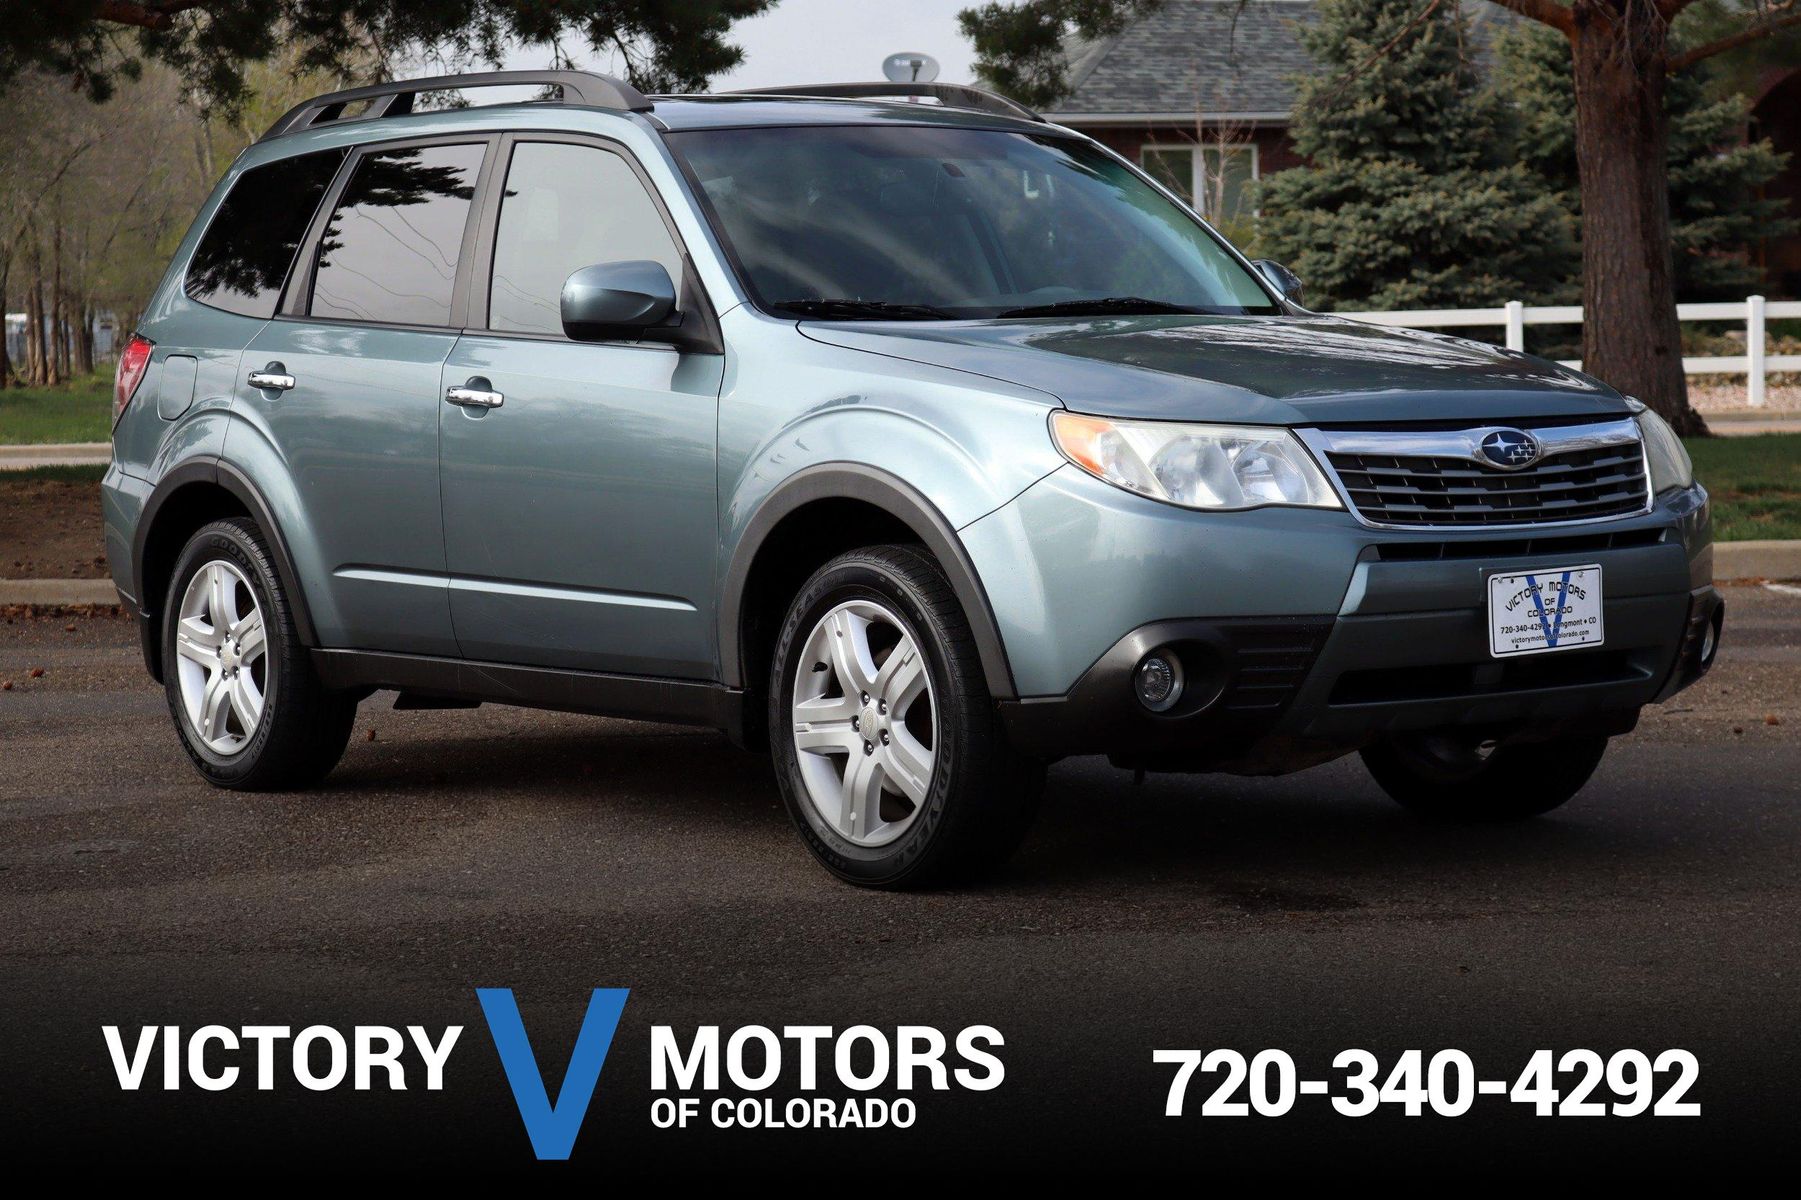 2009 Subaru Forester 2.5 X Limited Victory Motors of